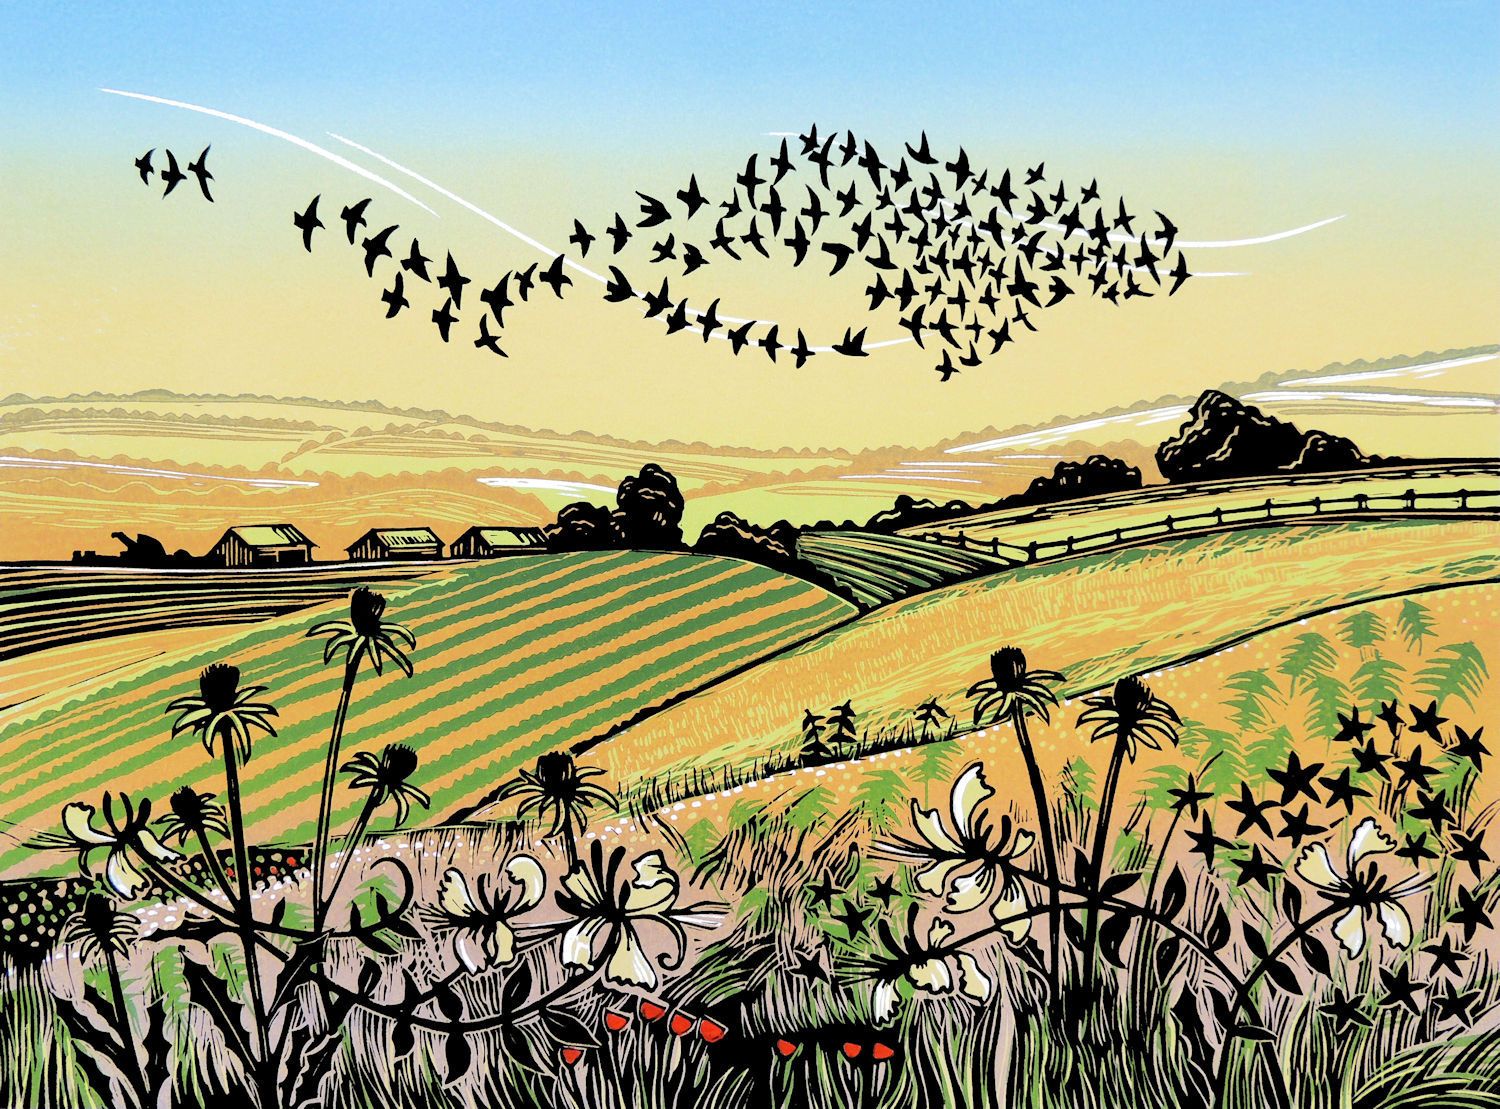 Over The Fields by Rob Barnes